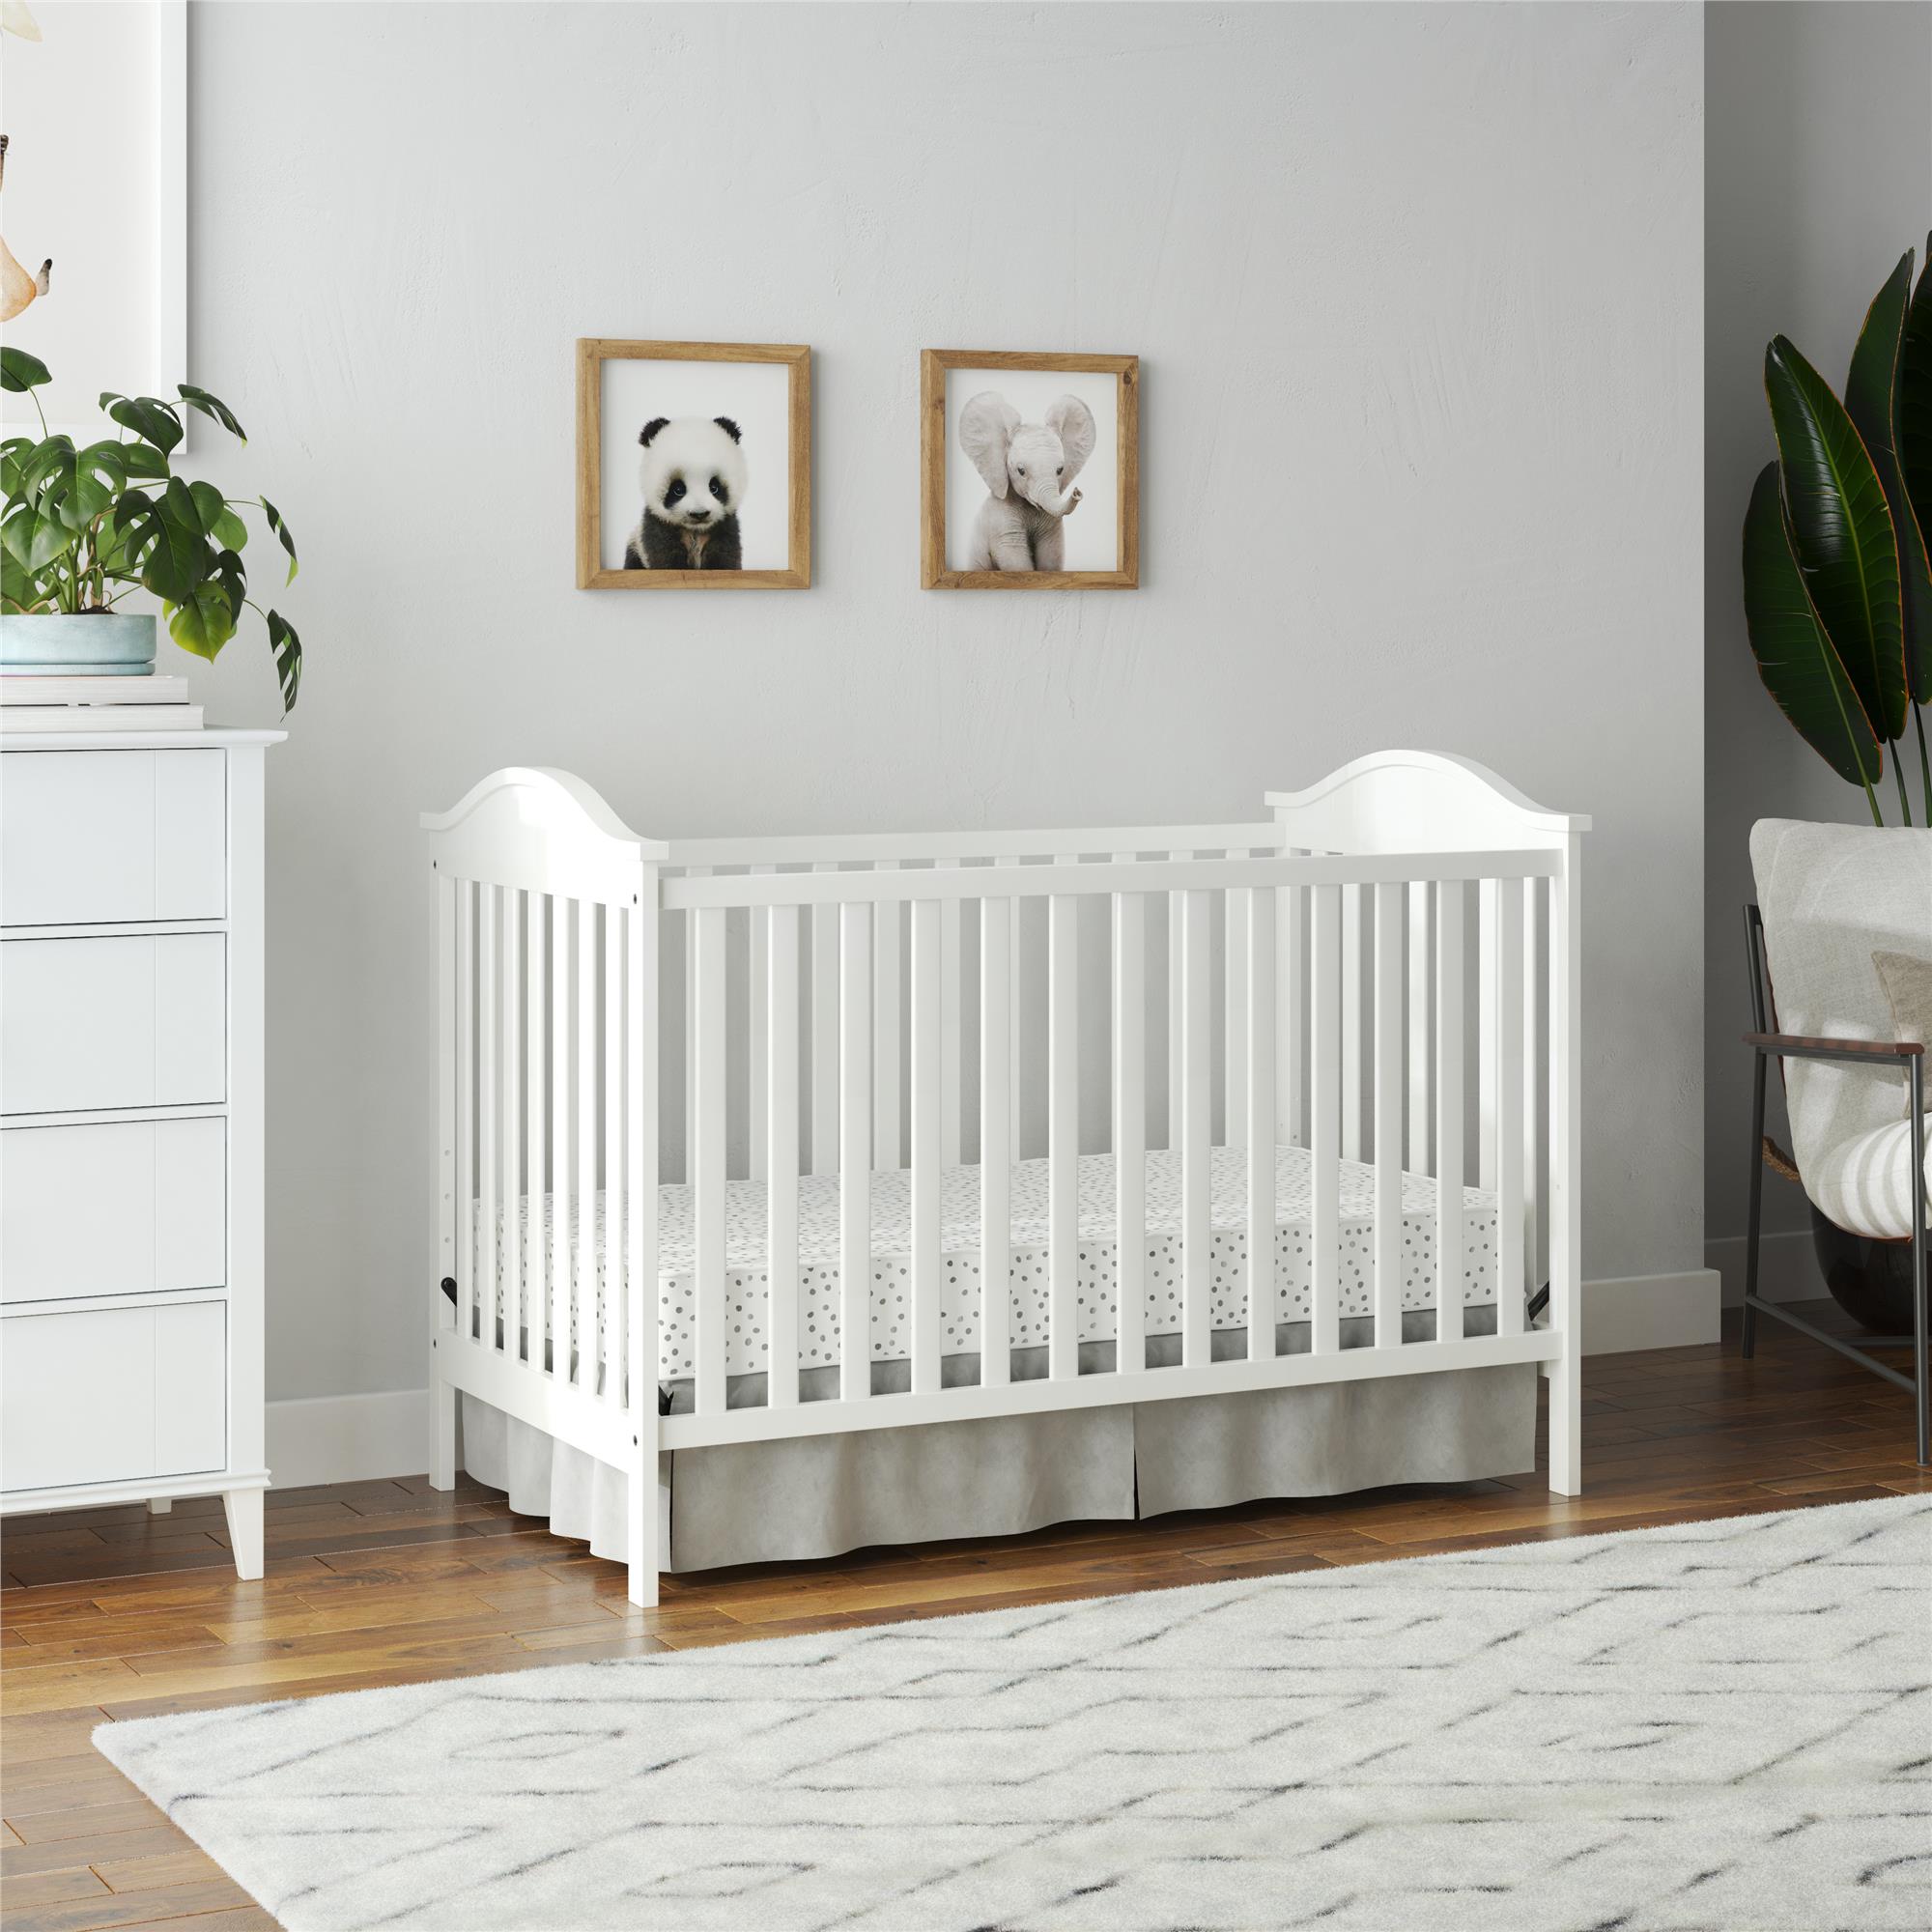 Baby Relax Adele 3-in-1 Convertible Crib, White - image 2 of 13